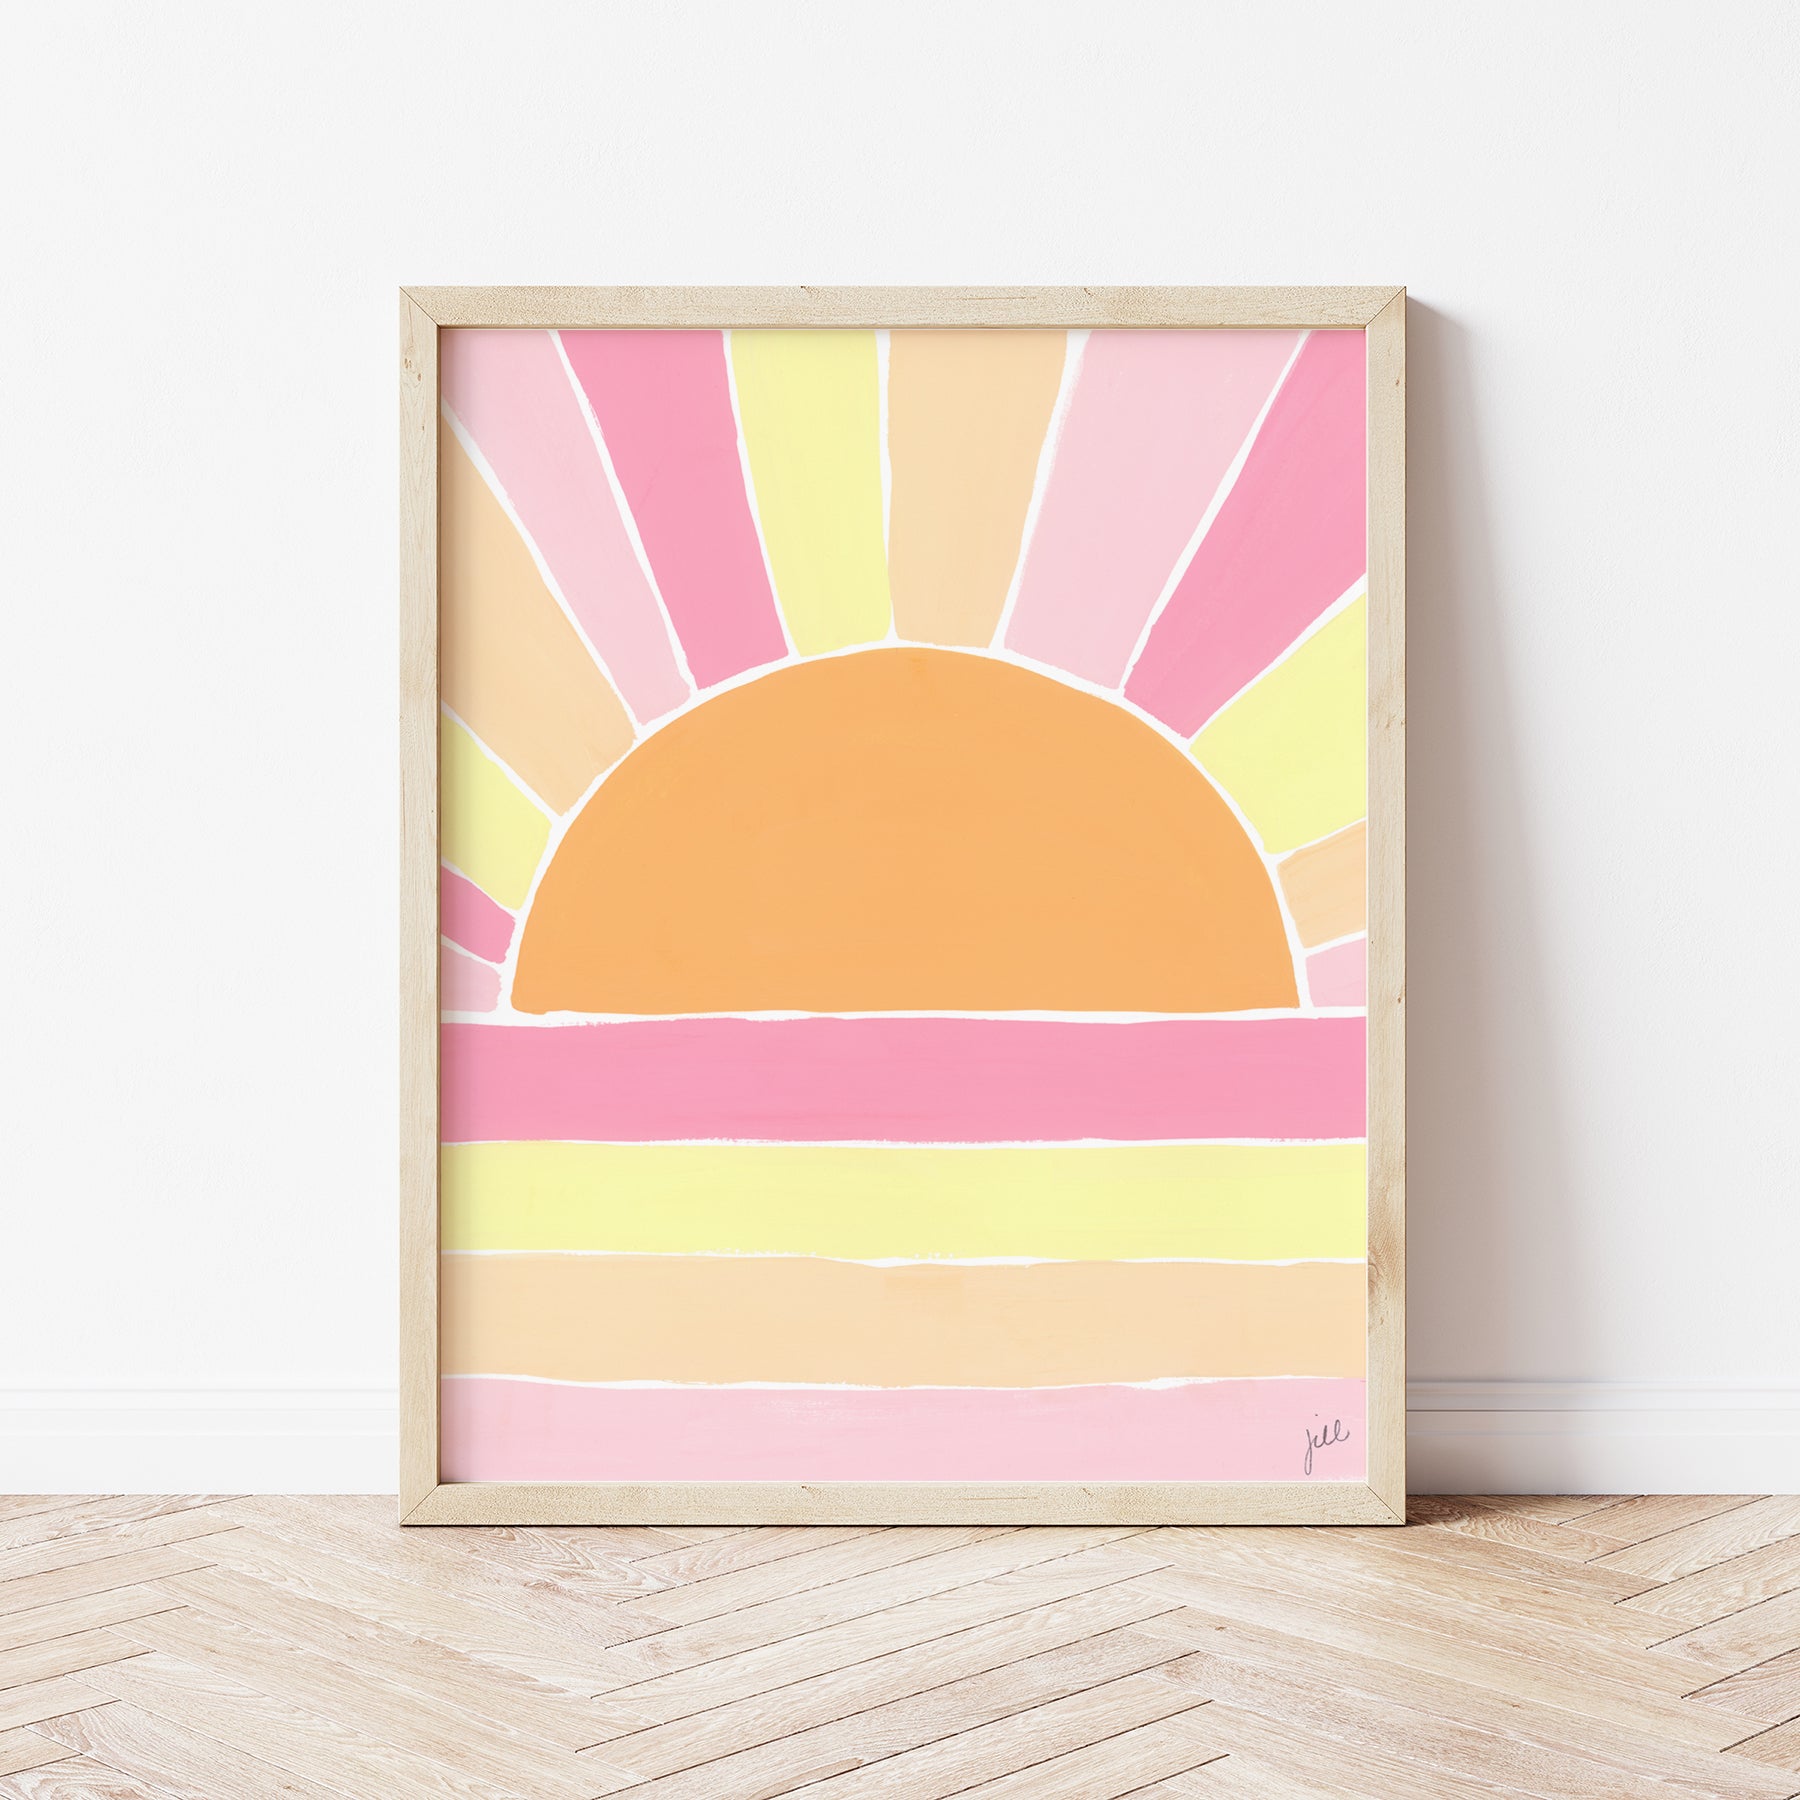 Retro Sun Art Print by Gert and Co